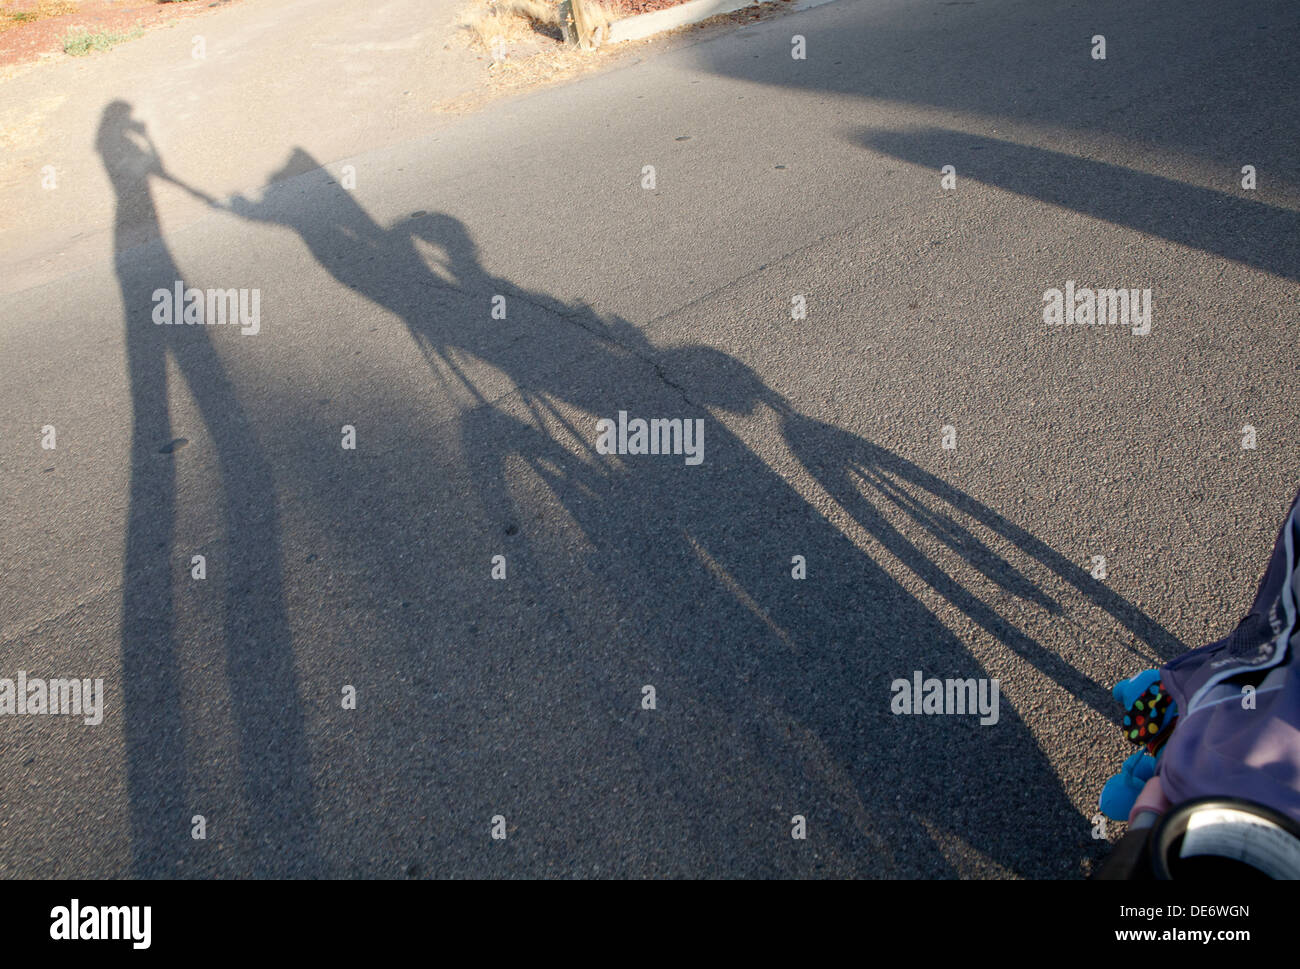 Shadow silhouette of a mother pushing a baby in stroller at sunset. Stock Photo